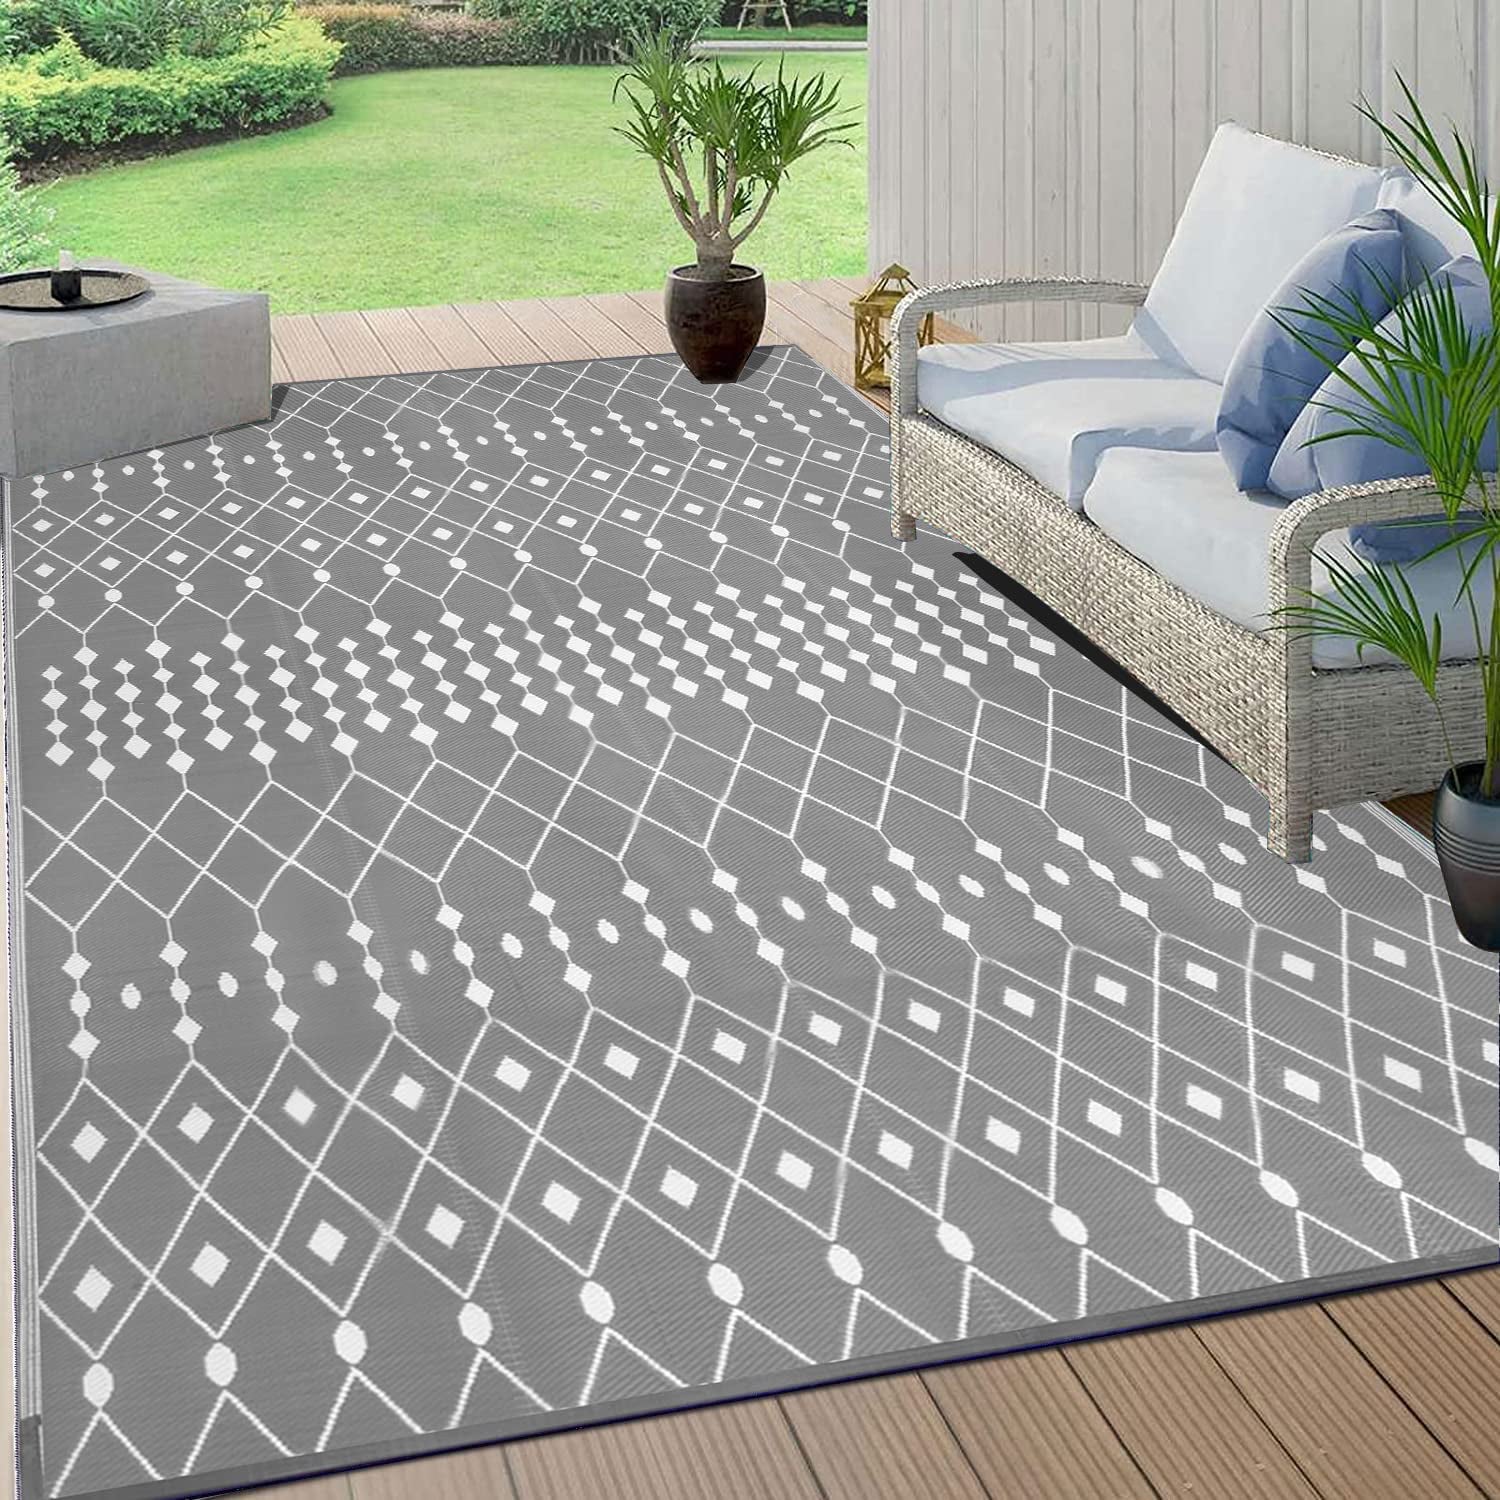 Reversible Mats - Outdoor Rugs 9'x12' for Patios Clearance, Plastic Straw  Rugs Waterproof, Portable, Large Floor Mat and Rugs for Outdoor RV,  Balcony